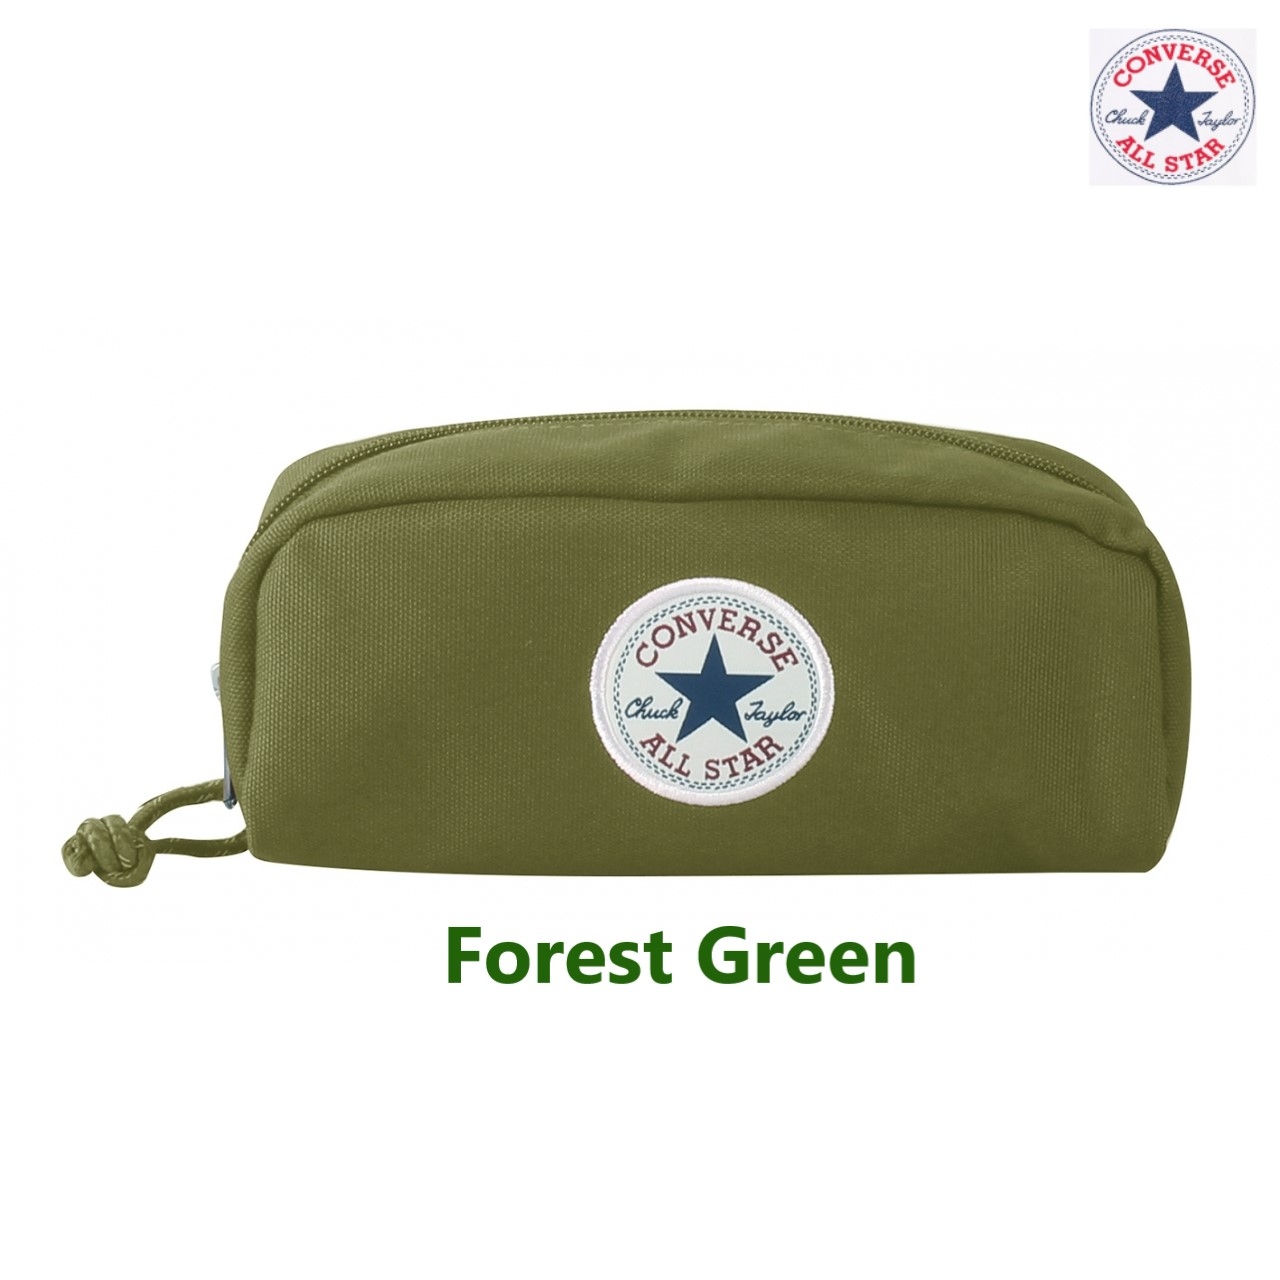 Converse Pencil Case-Forest Green